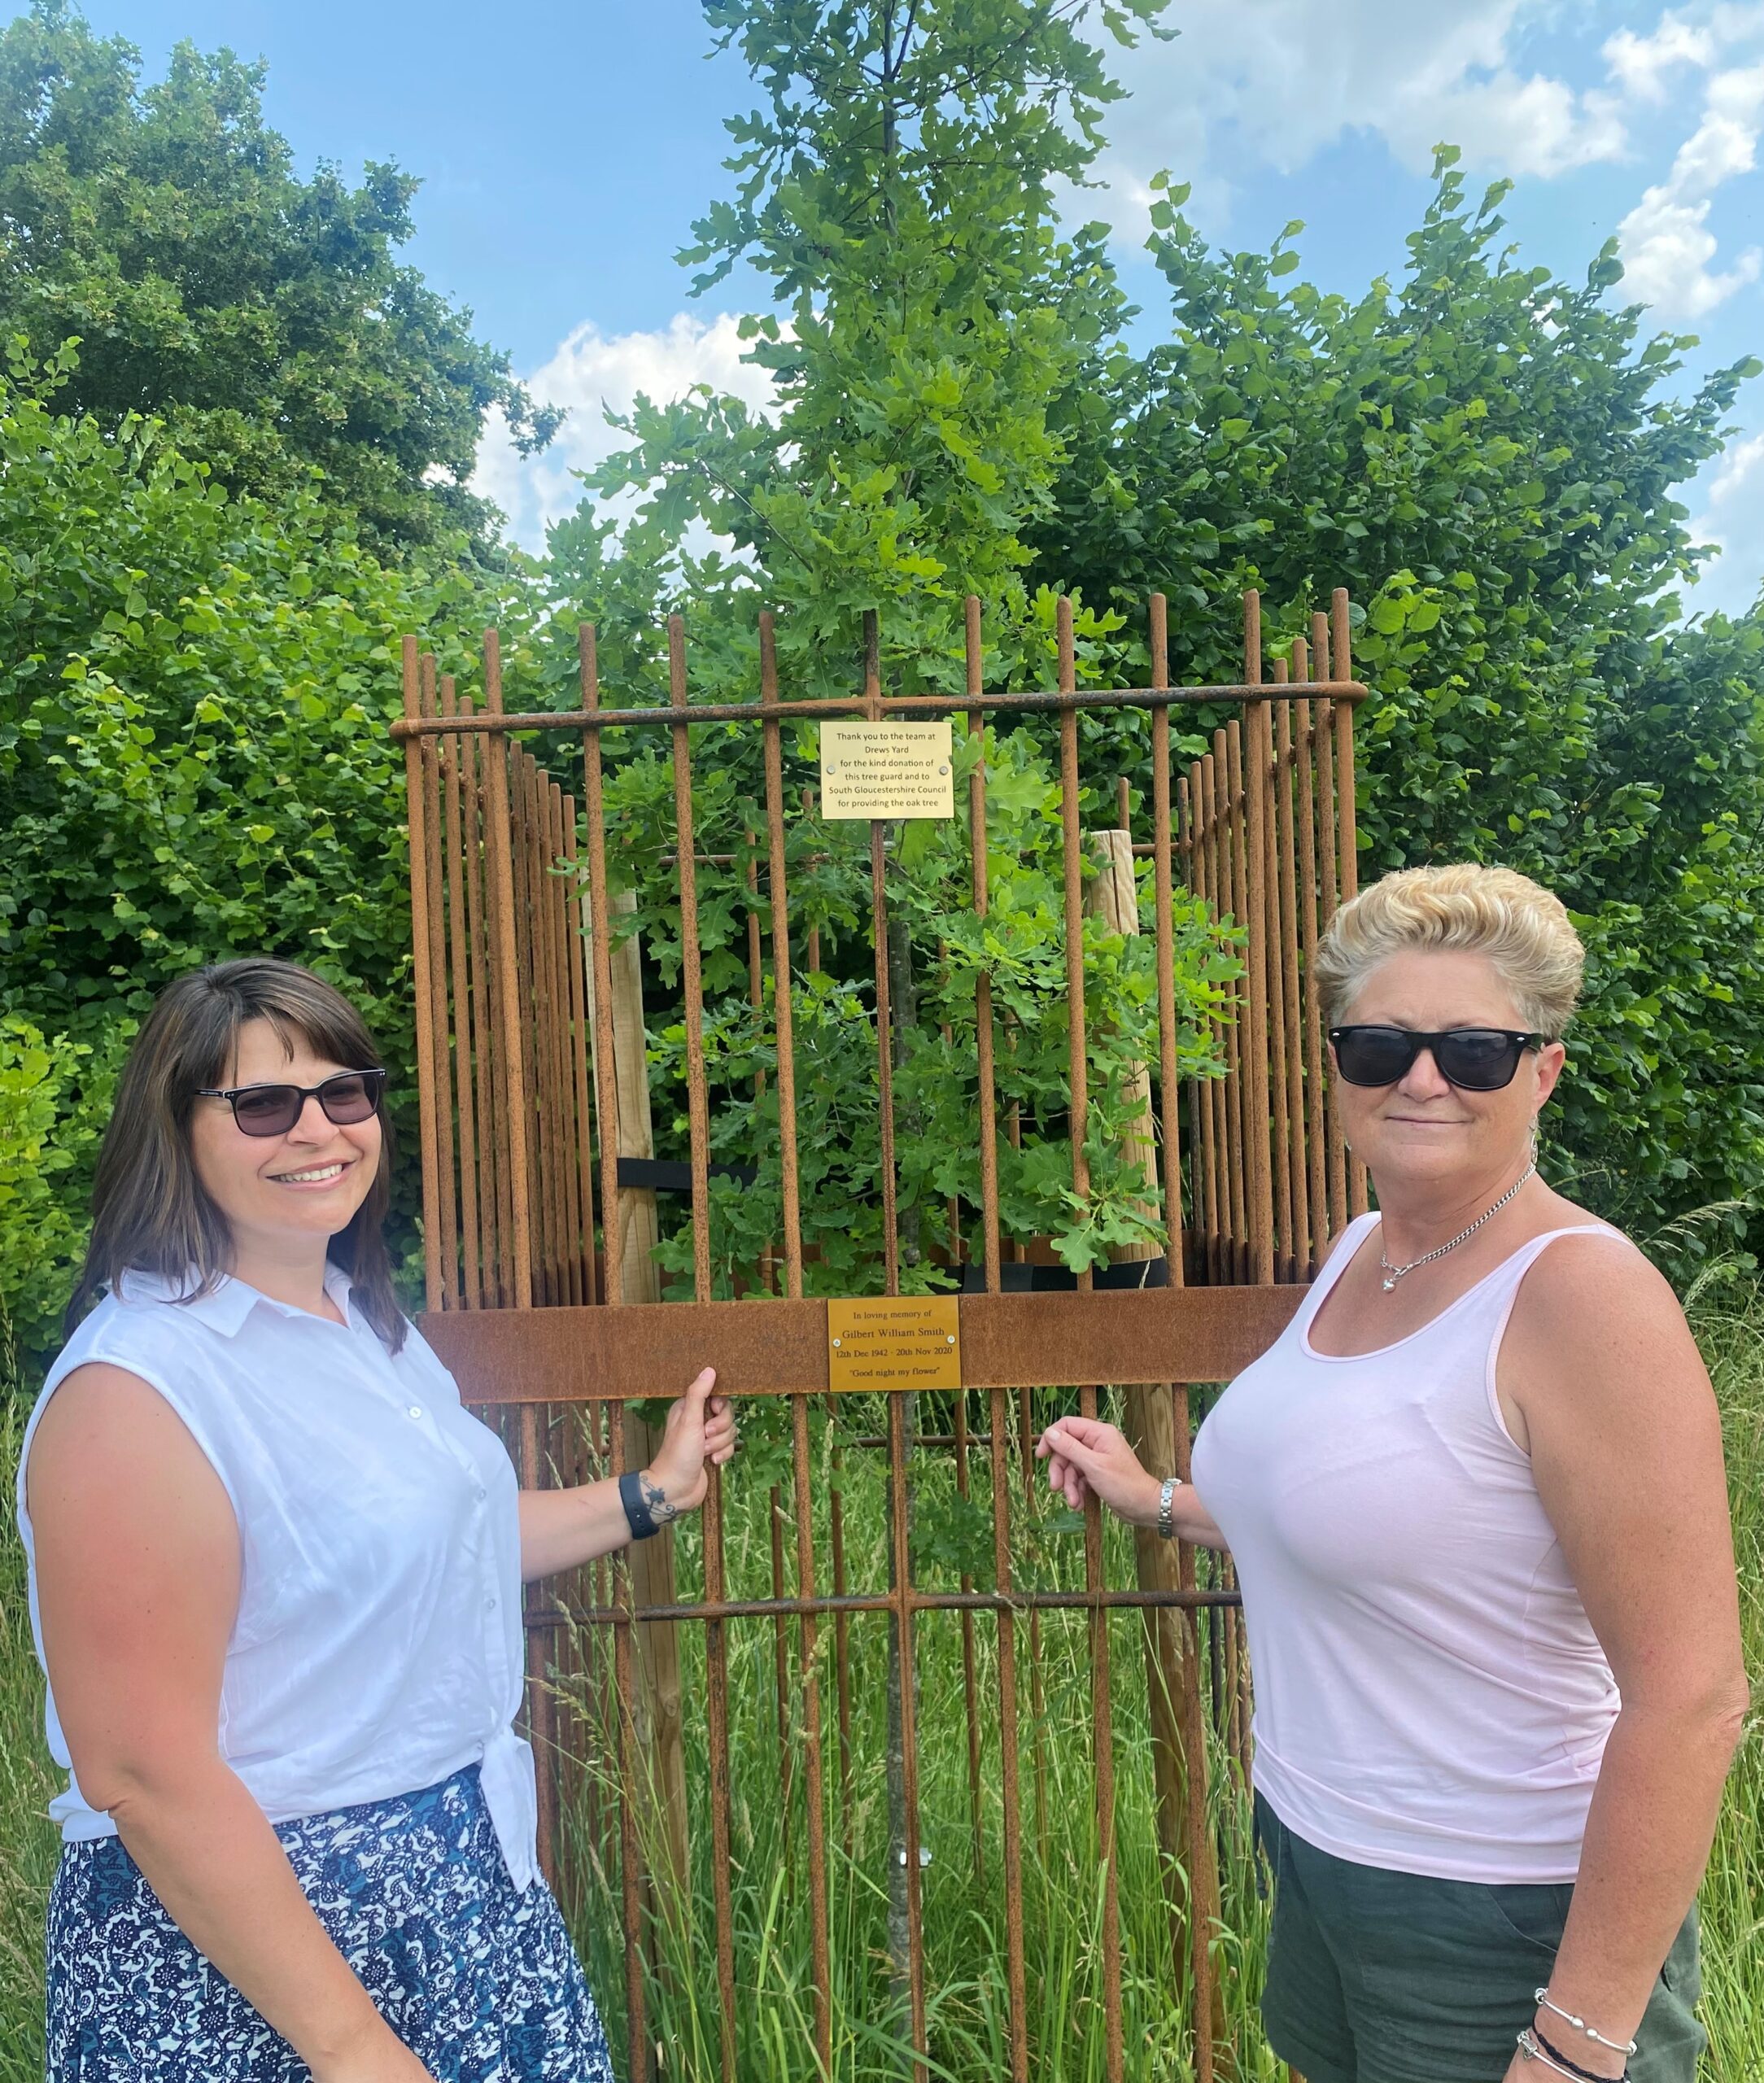 Two women, one with shoulder-length dark hair, one with short blonde hair, both wearing sunglasses, stand in front of a young oak tree. The oak tree is surrounded by bronze-coloured metal railings. These railings are about a foot higher than the women's heads. There are two small plaques attached to the railings. 